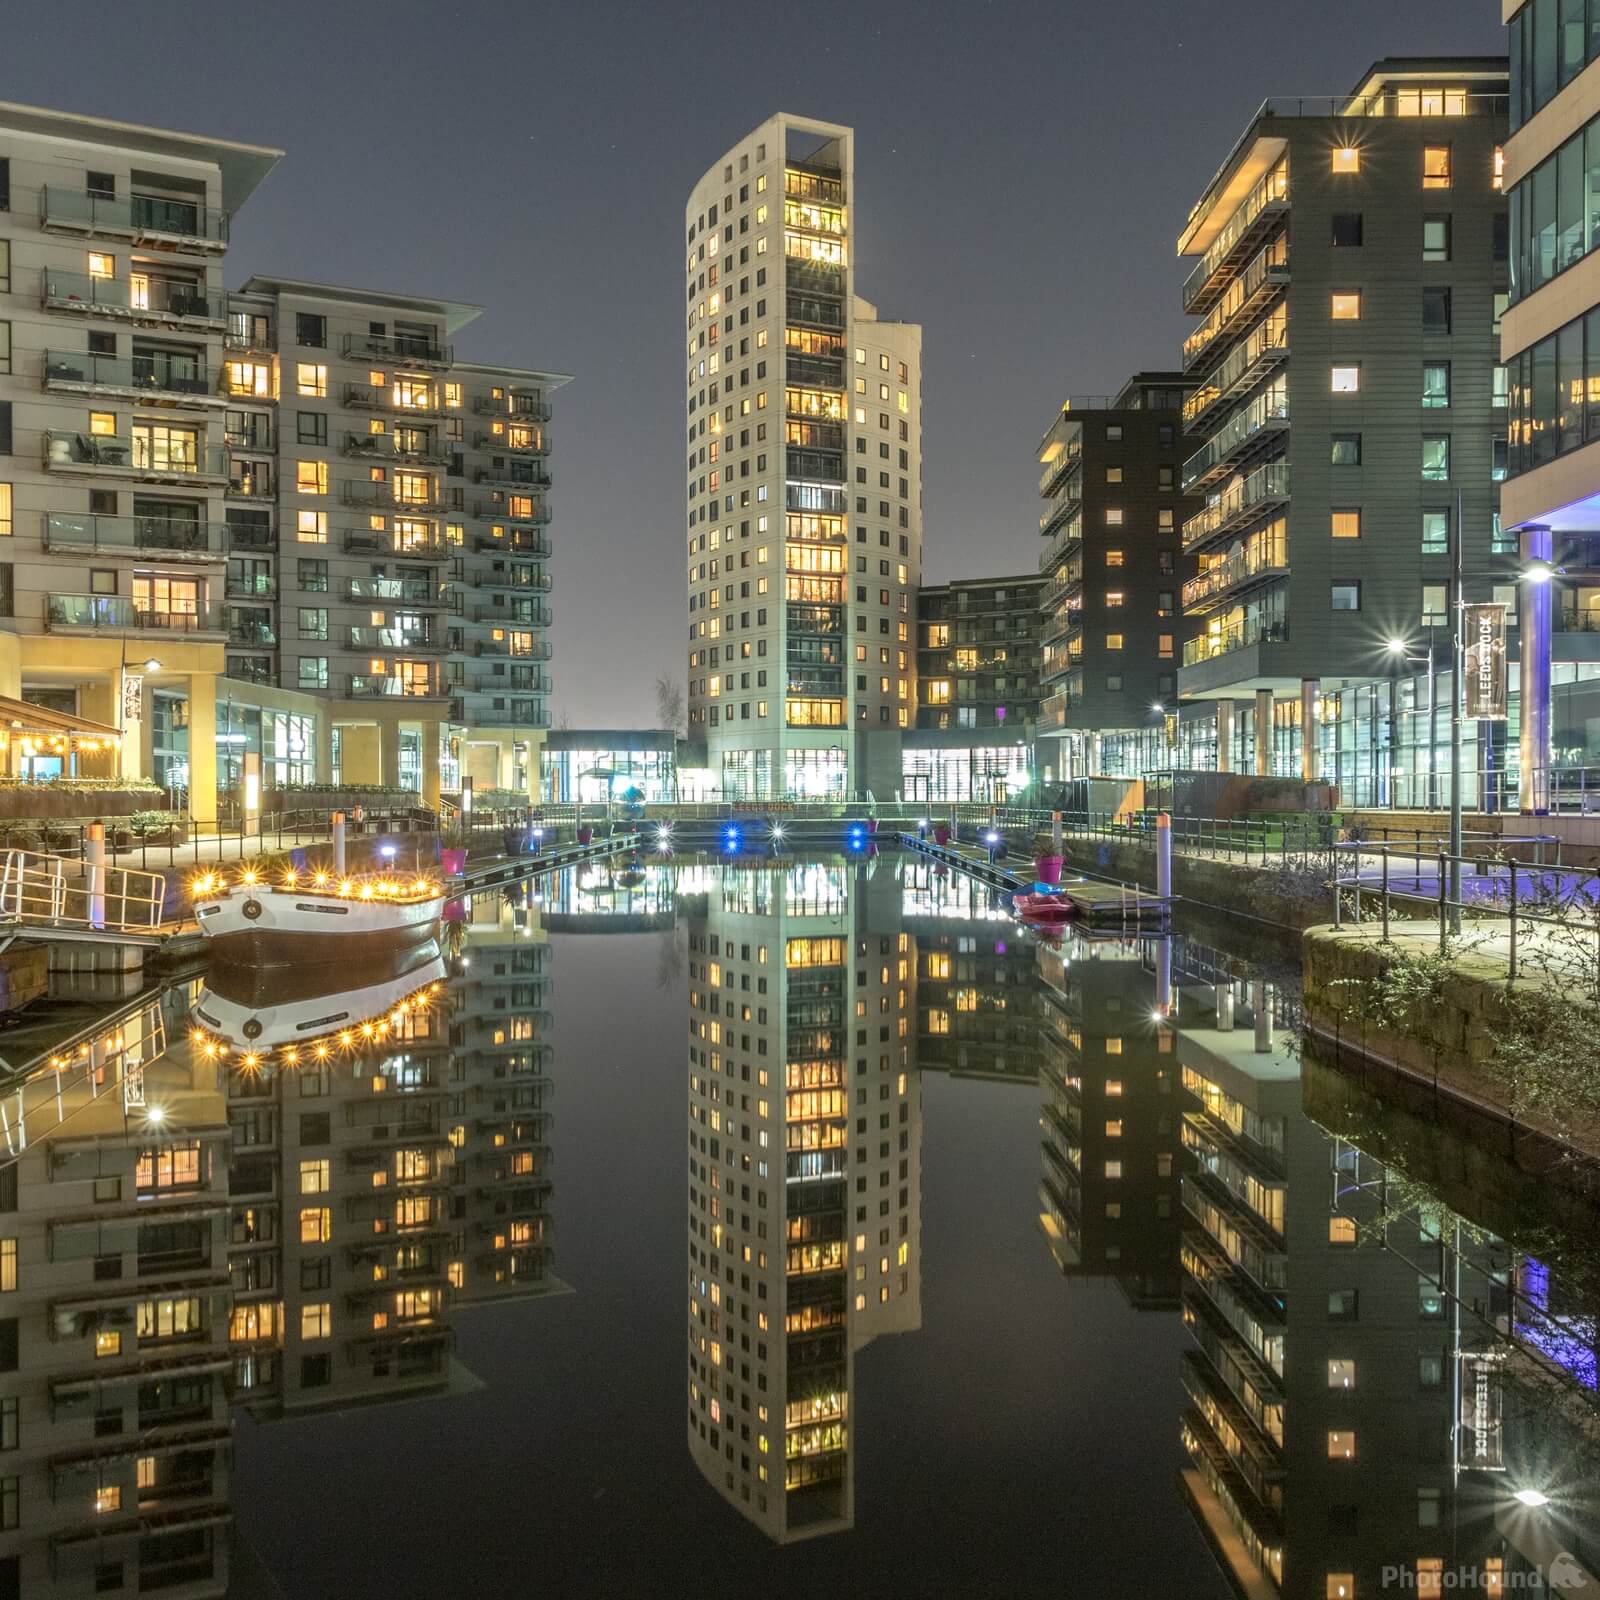 Image of Leeds Dock by Andy Killingbeck